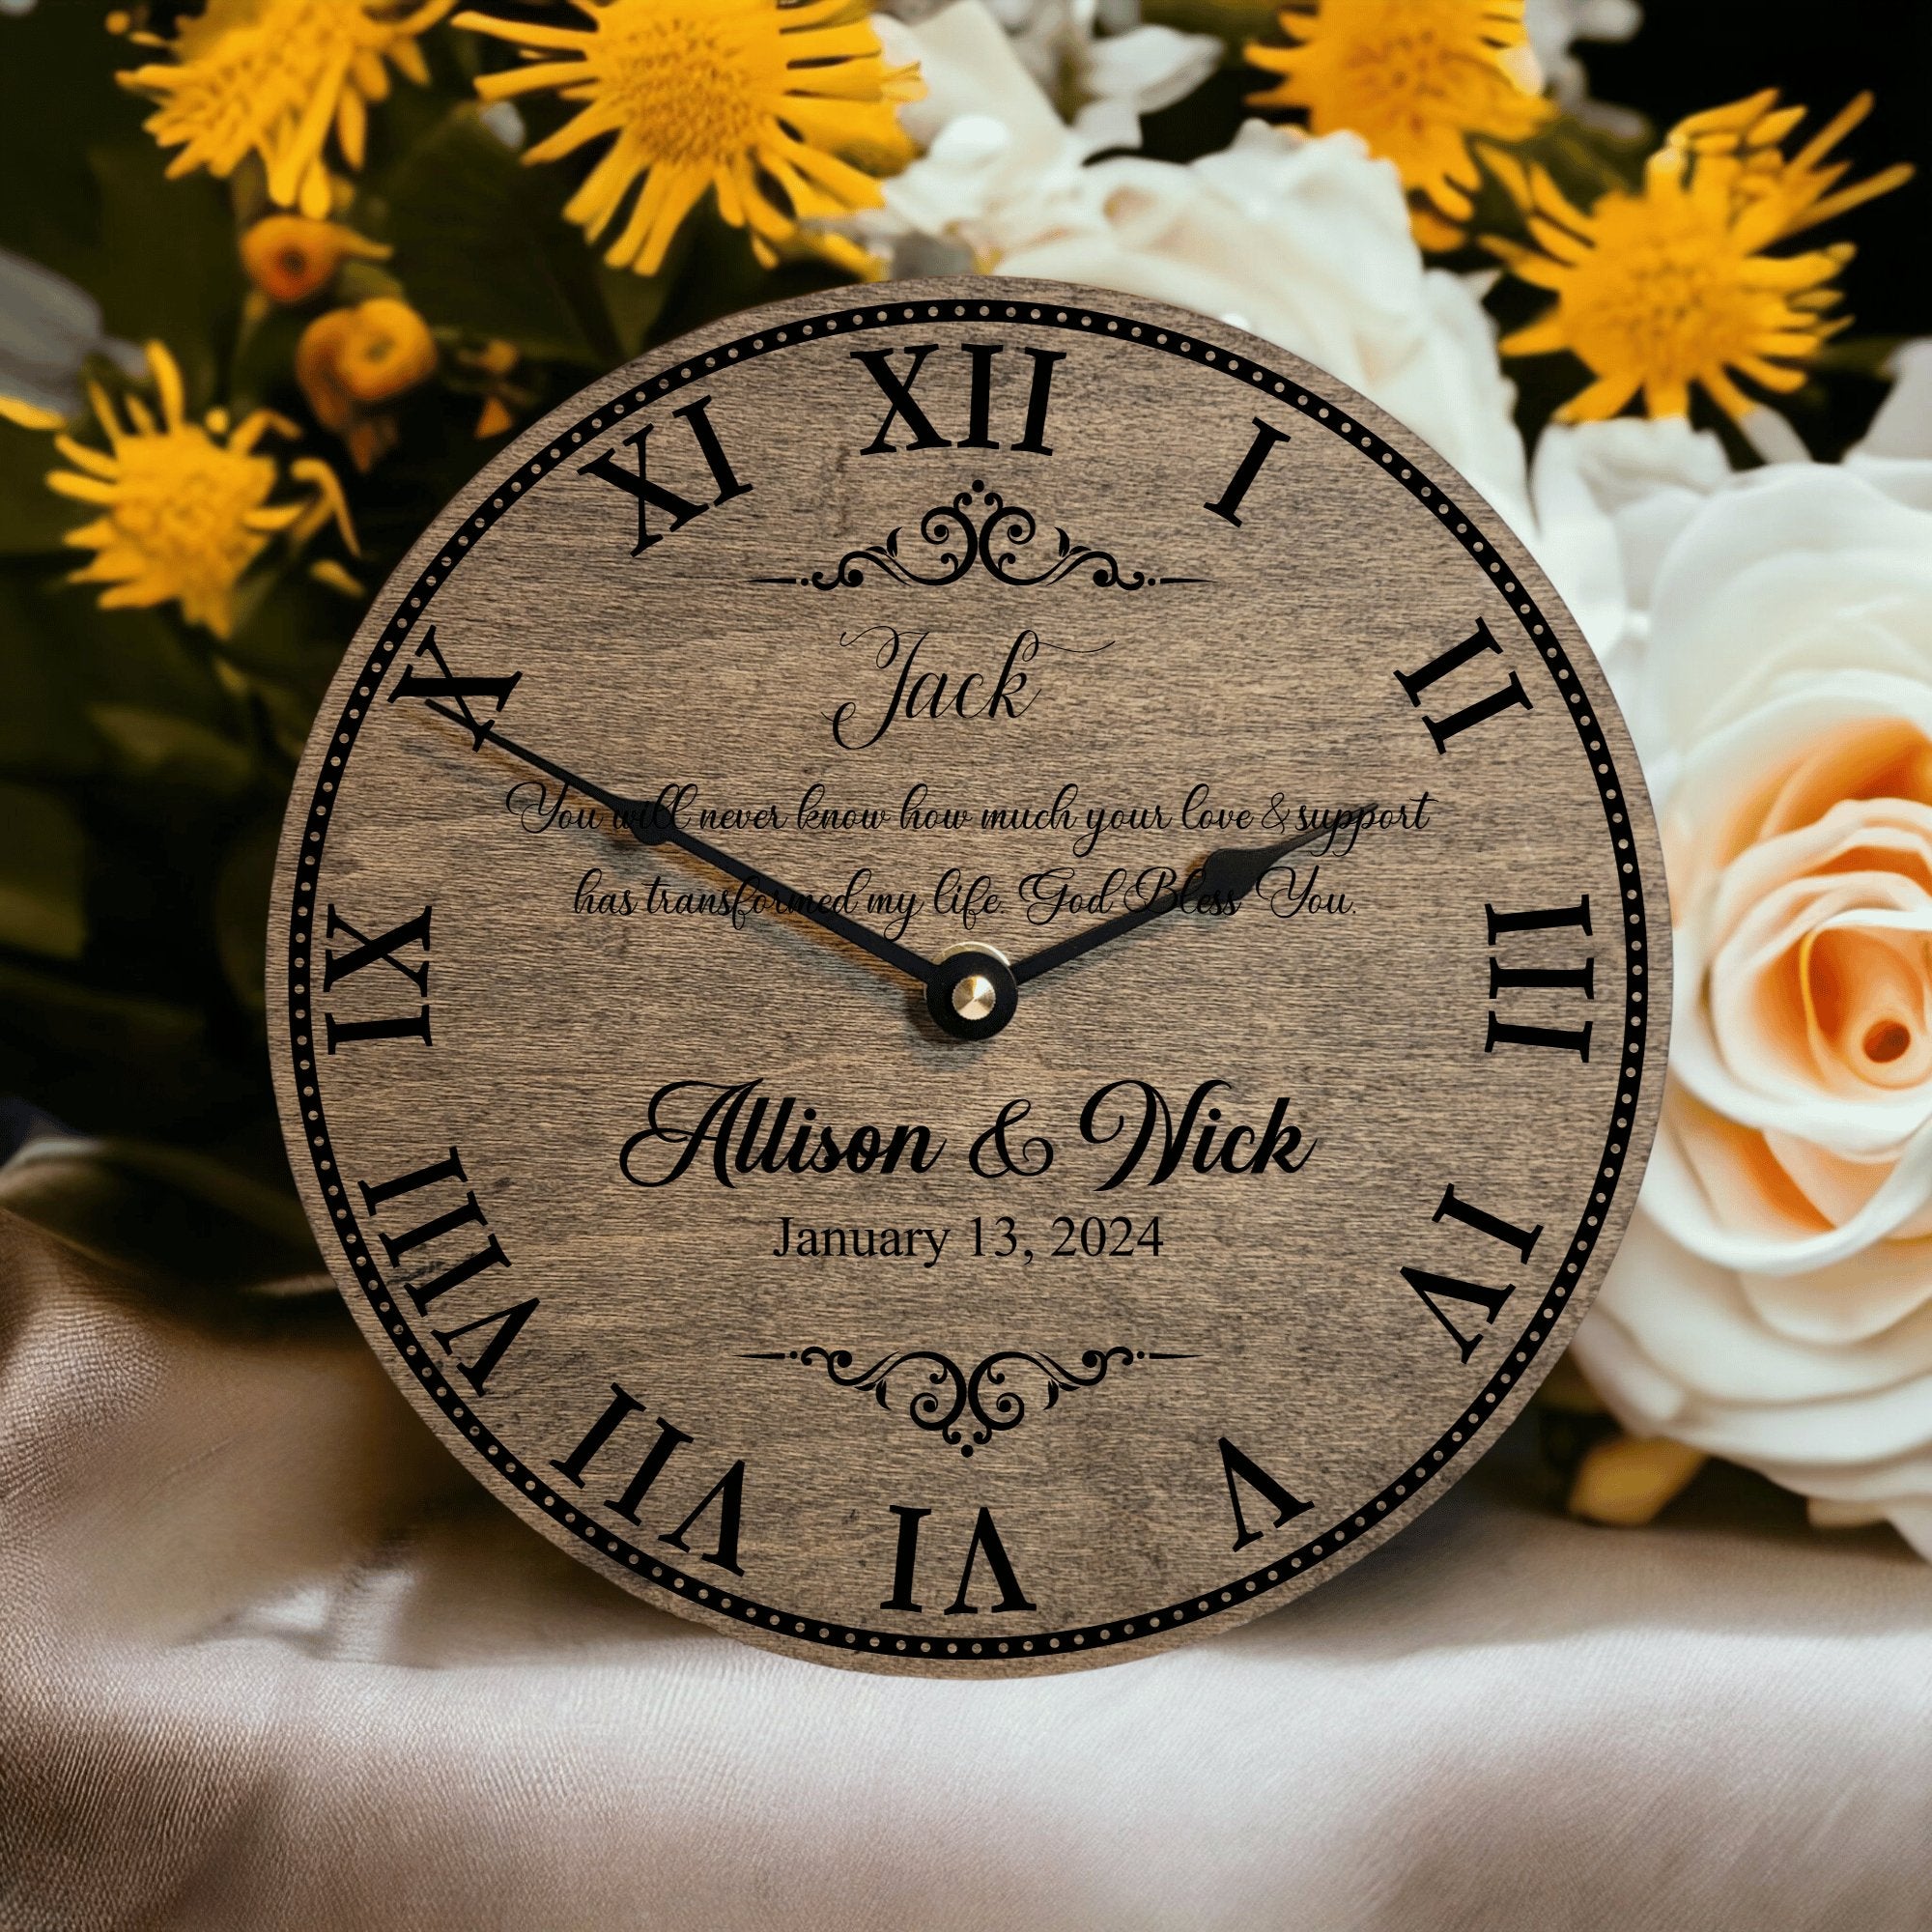 Christian Wedding Day Gift for Family & Friends of the Bride & Groom - Wedding Clock - Designodeal